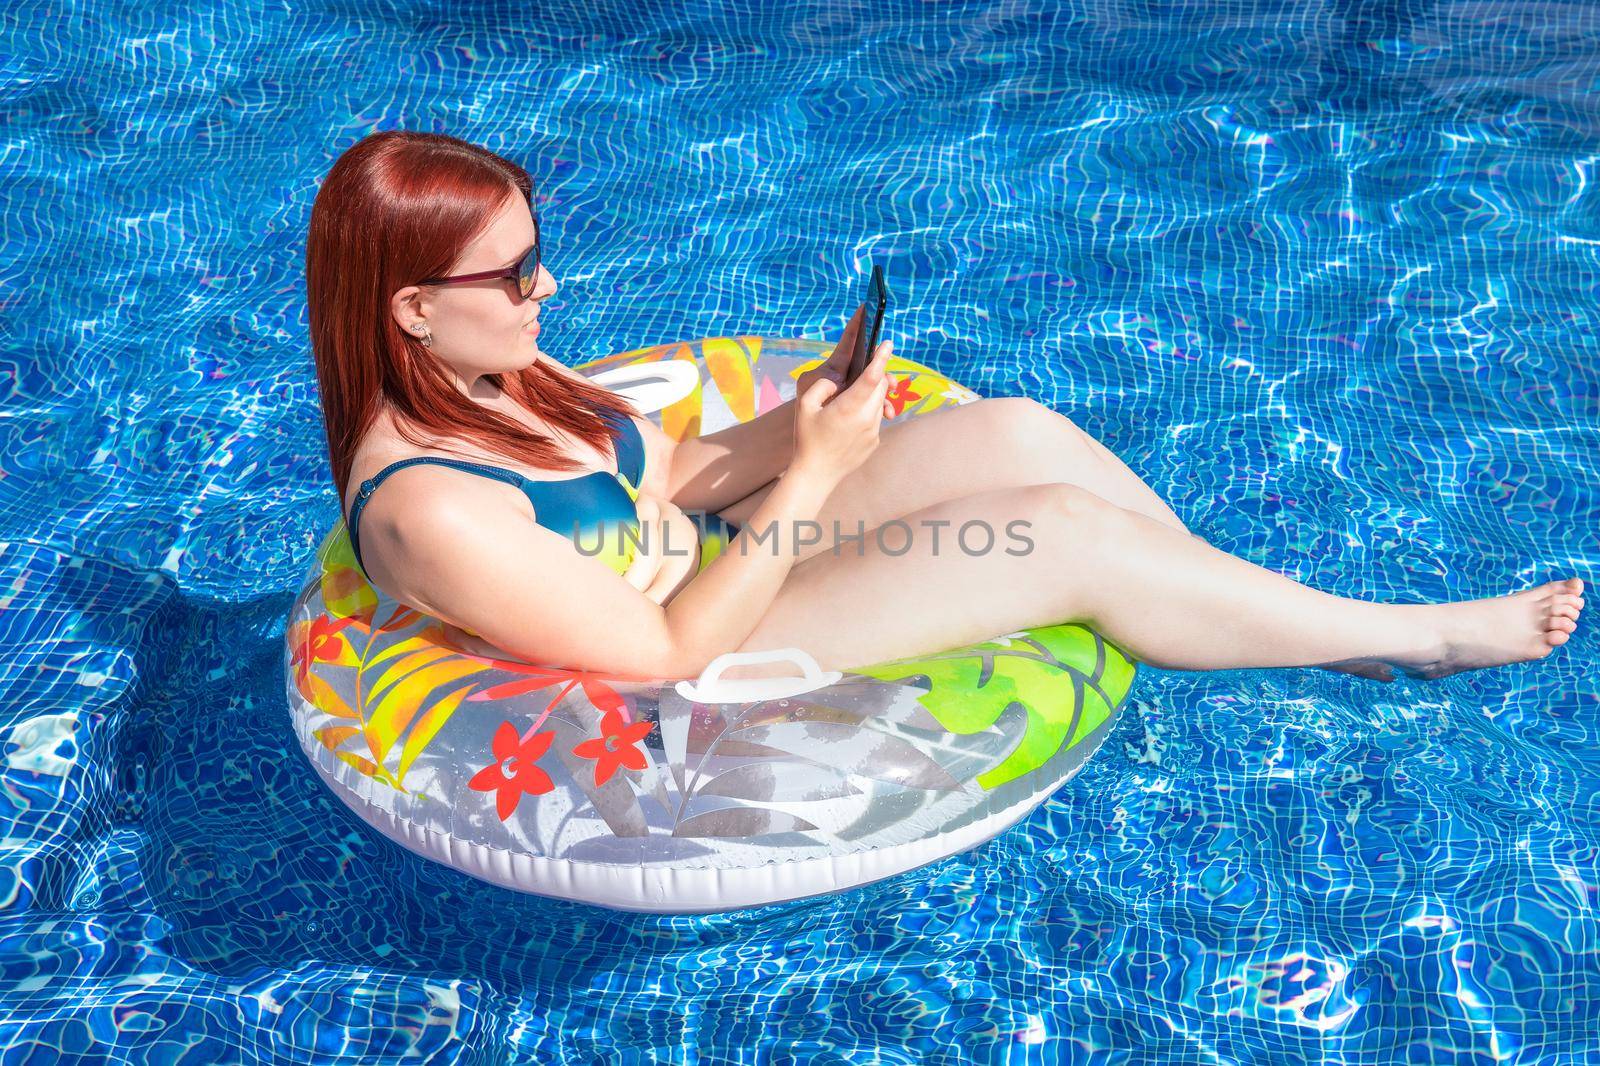 young redhead girl in bikini, looking at her smartphone floating on a ring float inside the pool. young girl on holiday relaxing, sharing the moments on her social networks. outdoor garden, natural sunlight.